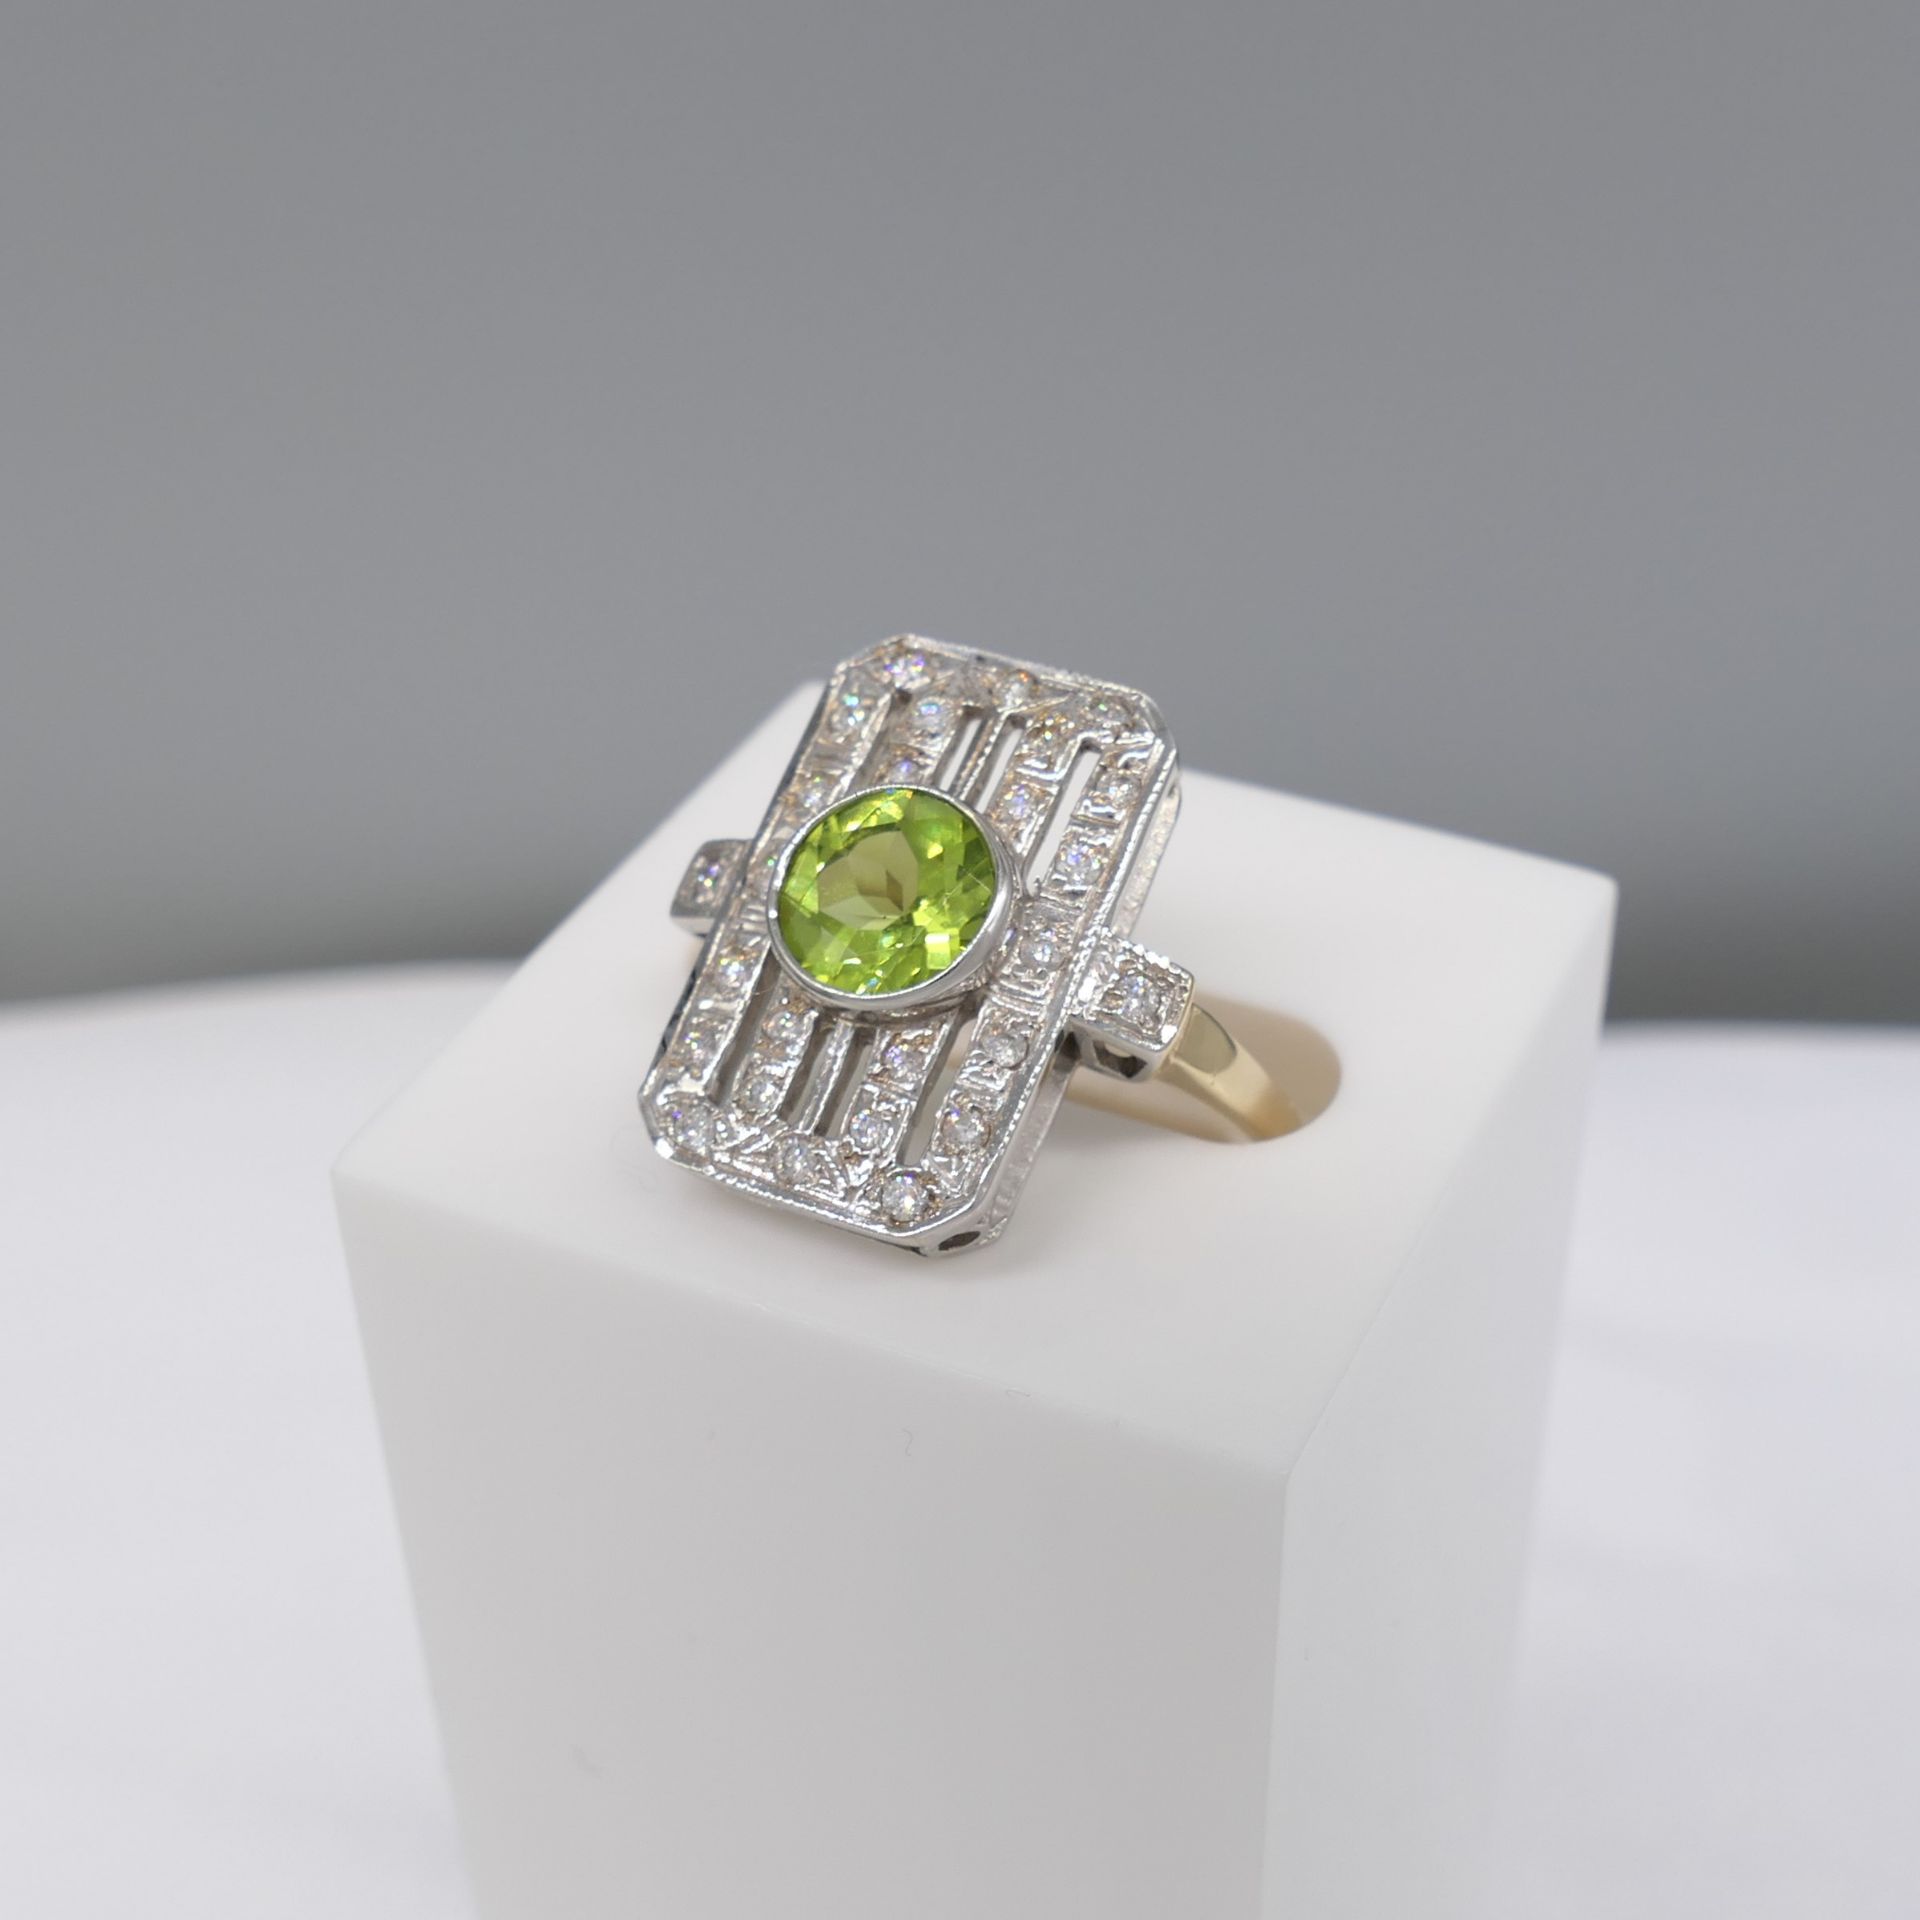 9ct White and Yellow Gold Vintage-style Peridot and Diamond Panel Ring - Image 4 of 6